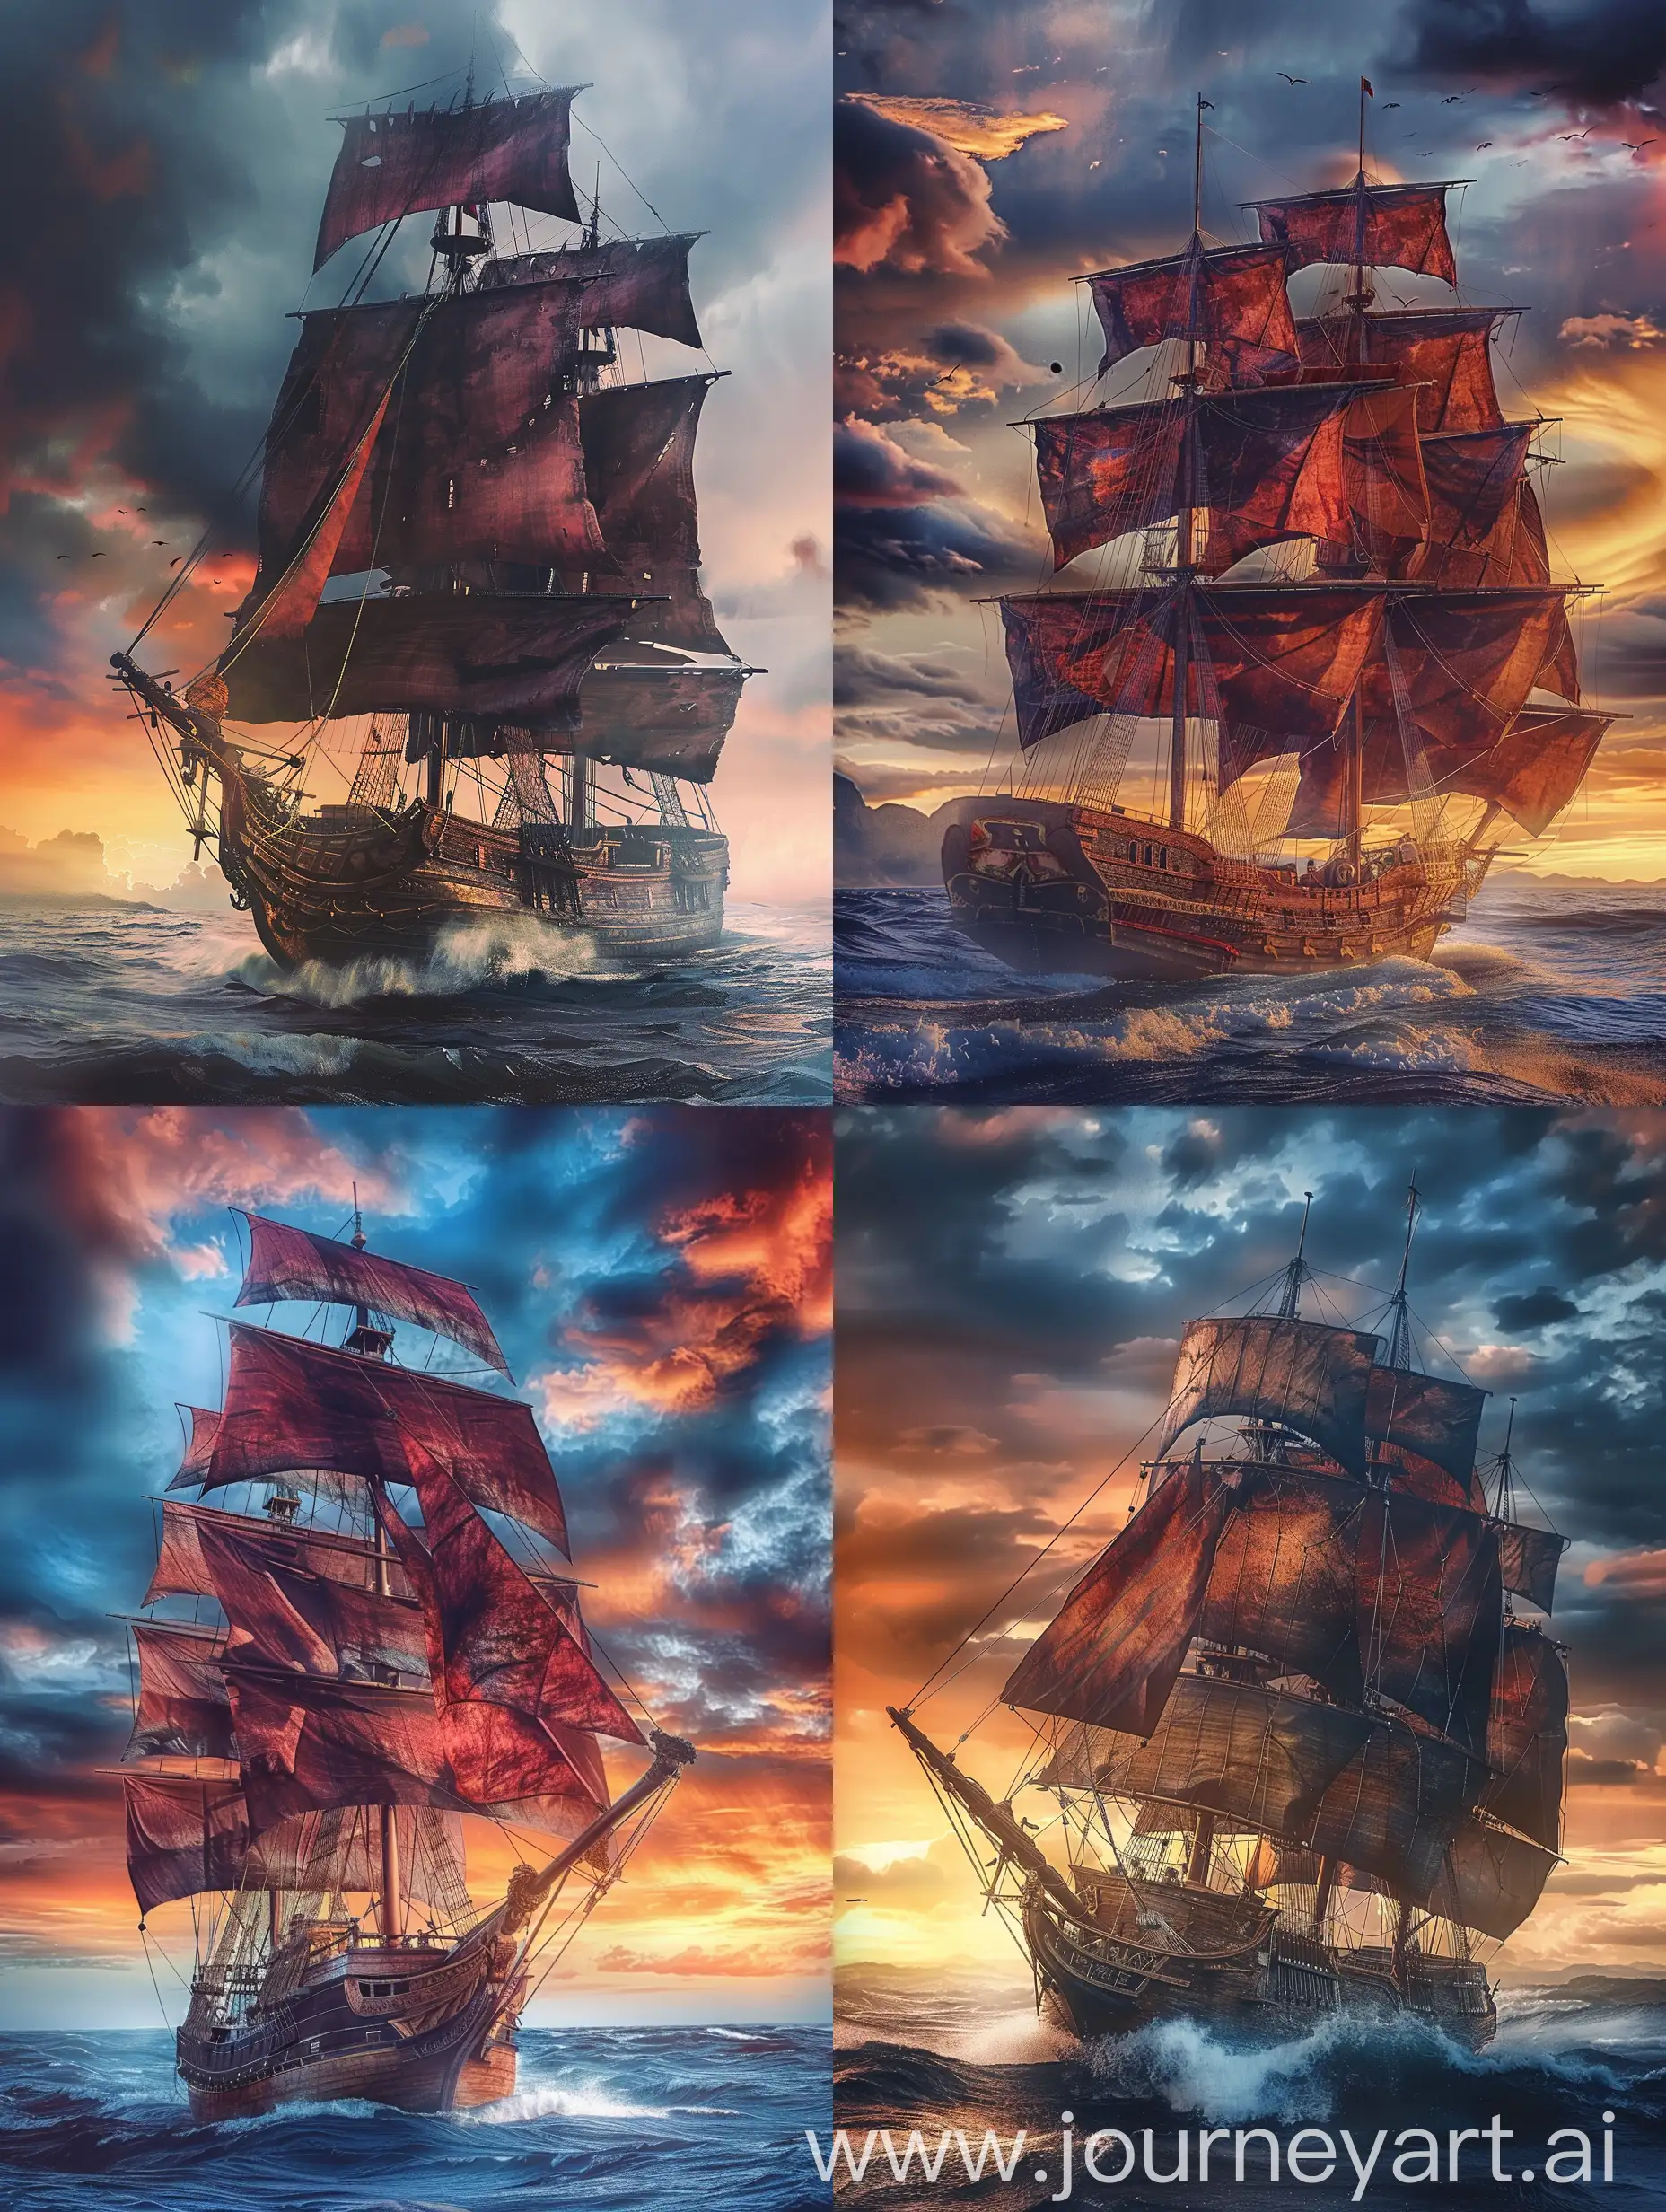 Sailing-Ship-with-Crimson-Sails-Braving-a-Stormy-Sunrise